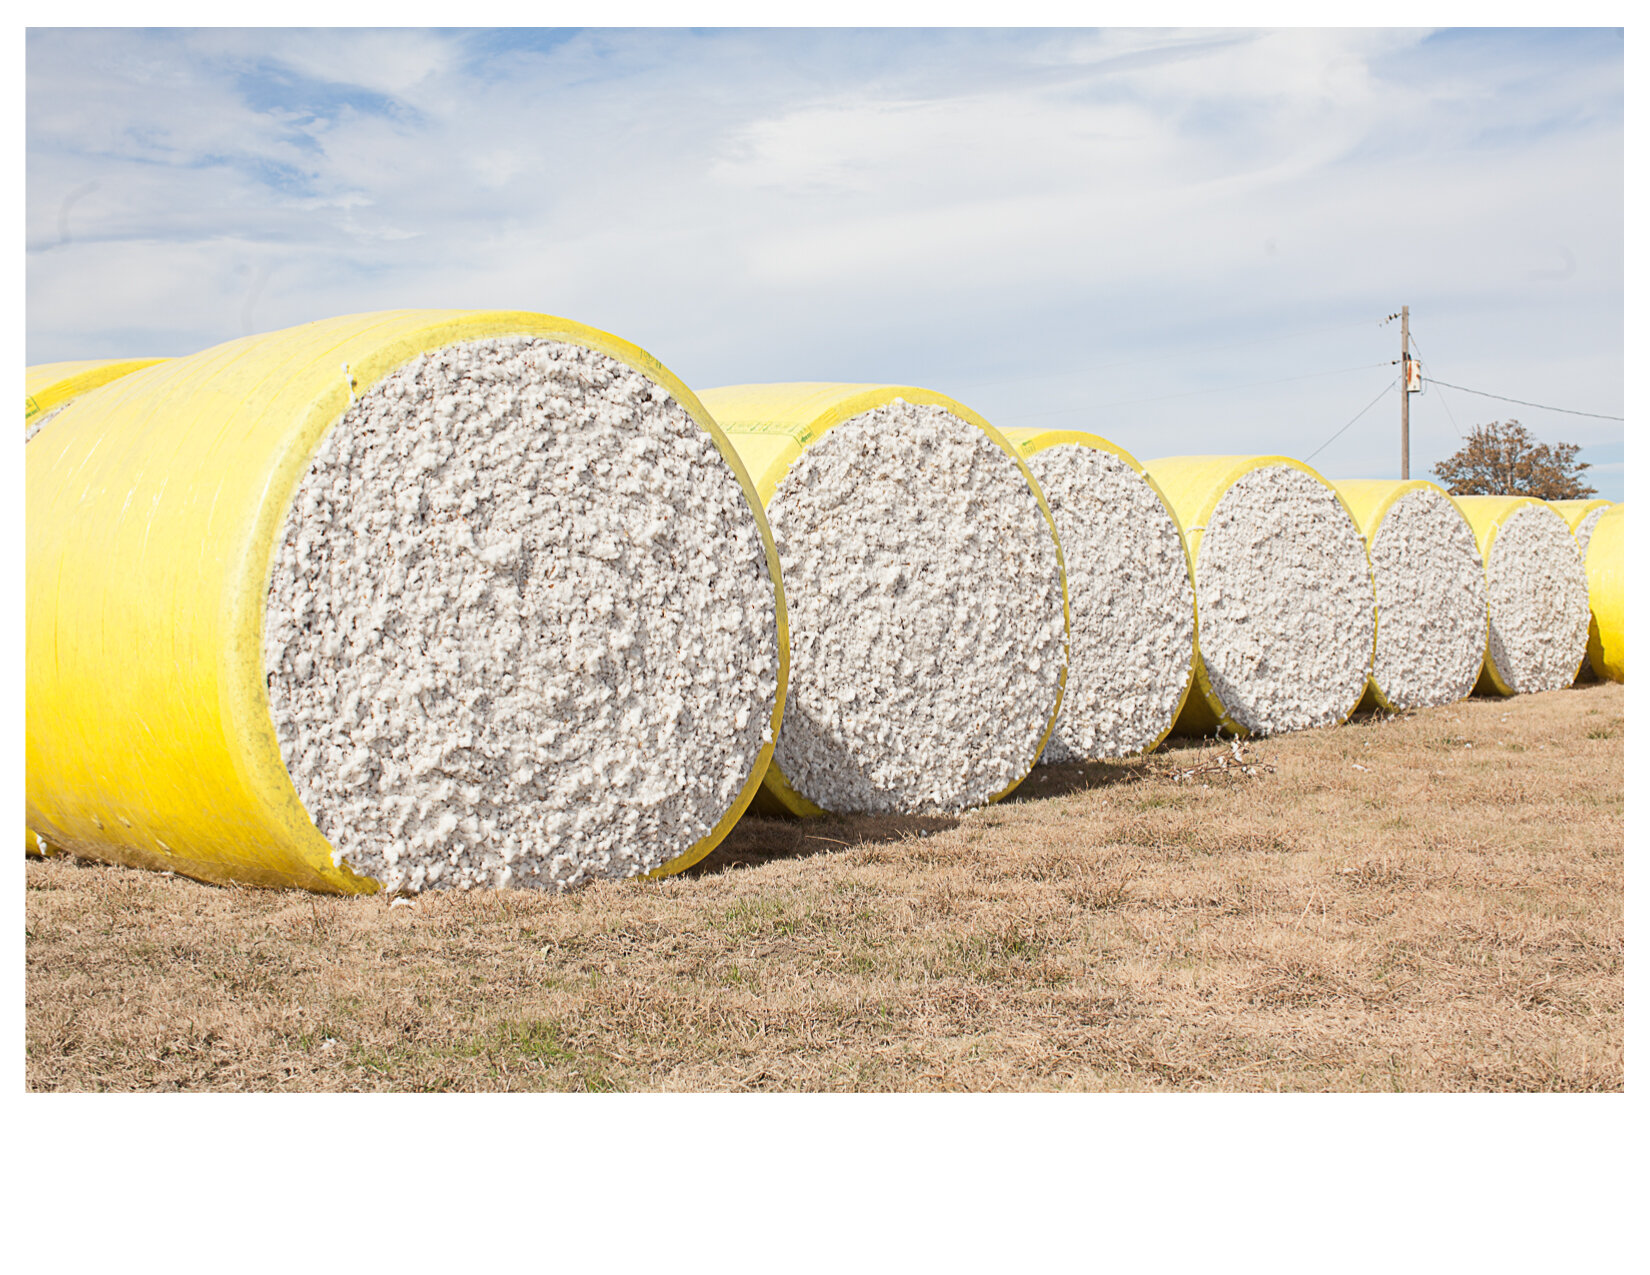 Cotton Bales, South of Greenville, MS